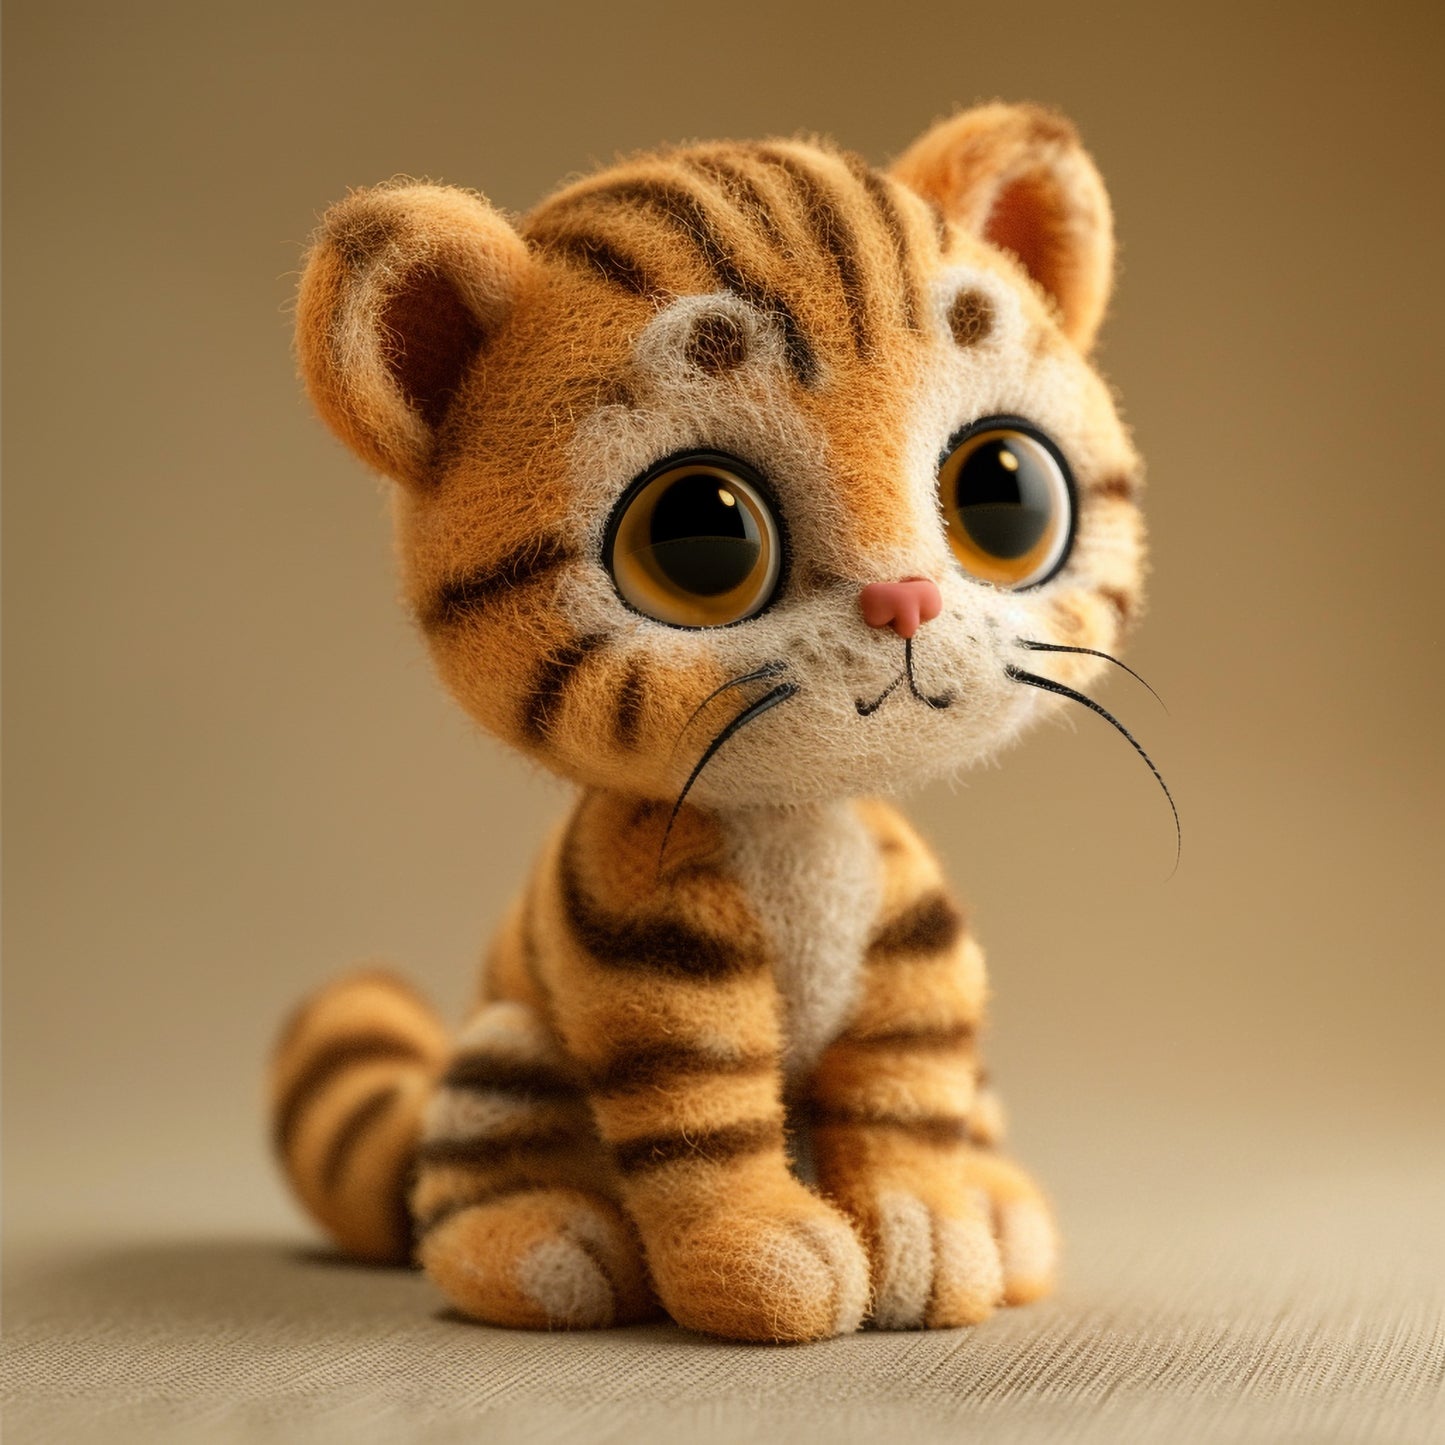 Adorable Needle Felted Bengal Cat with Big Eyes